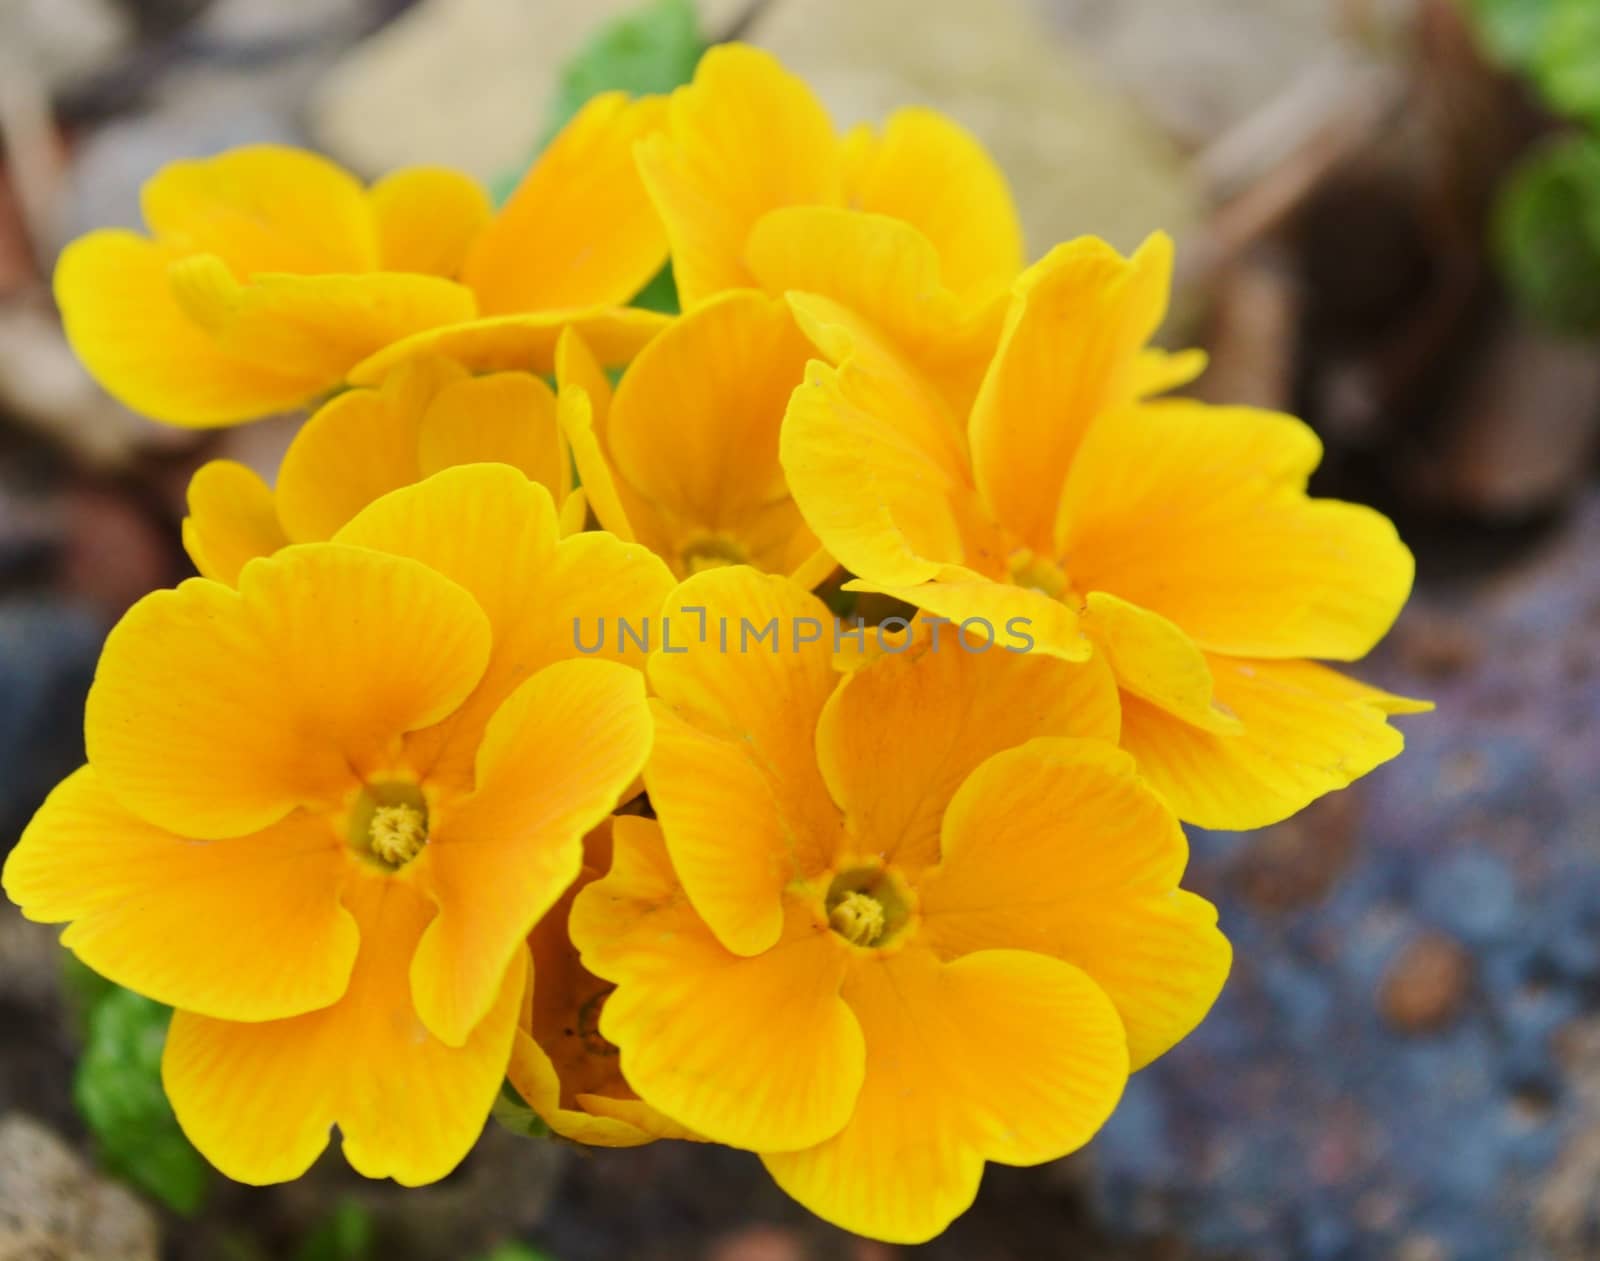 Colourful yellow Primula flowers.